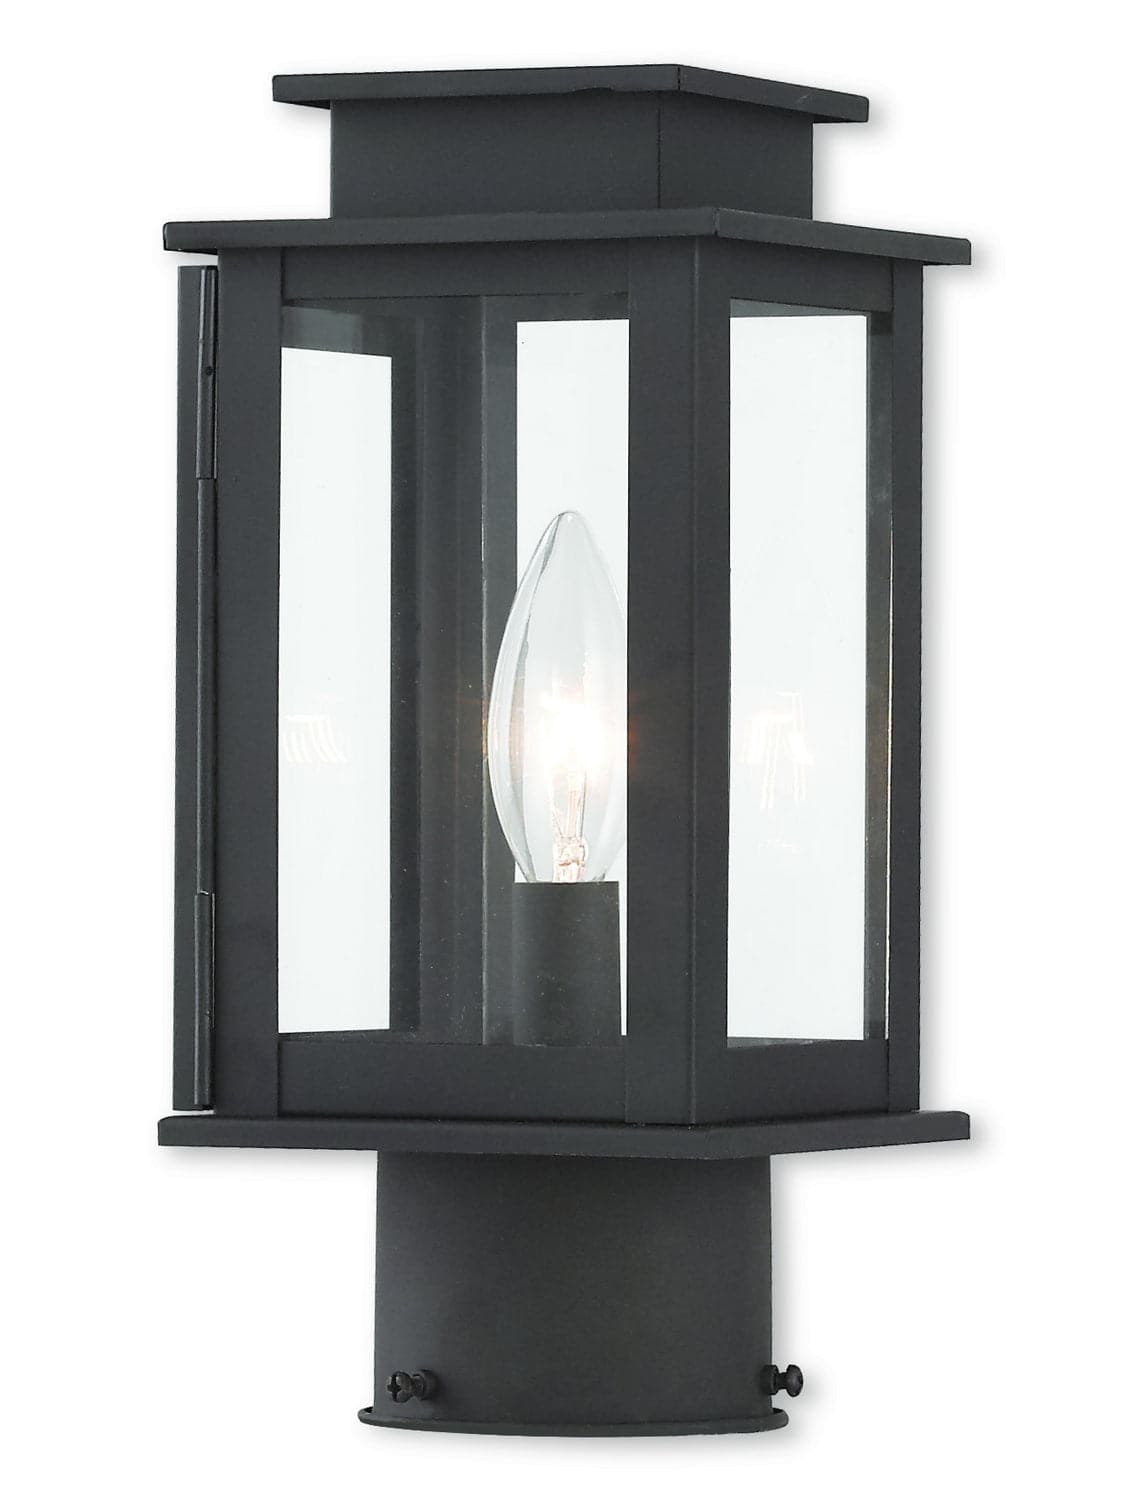 Livex Lighting - 20201-07 - One Light Outdoor Post-Top Lanterm - Princeton - Bronze w/ Polished Chrome Stainless Steel